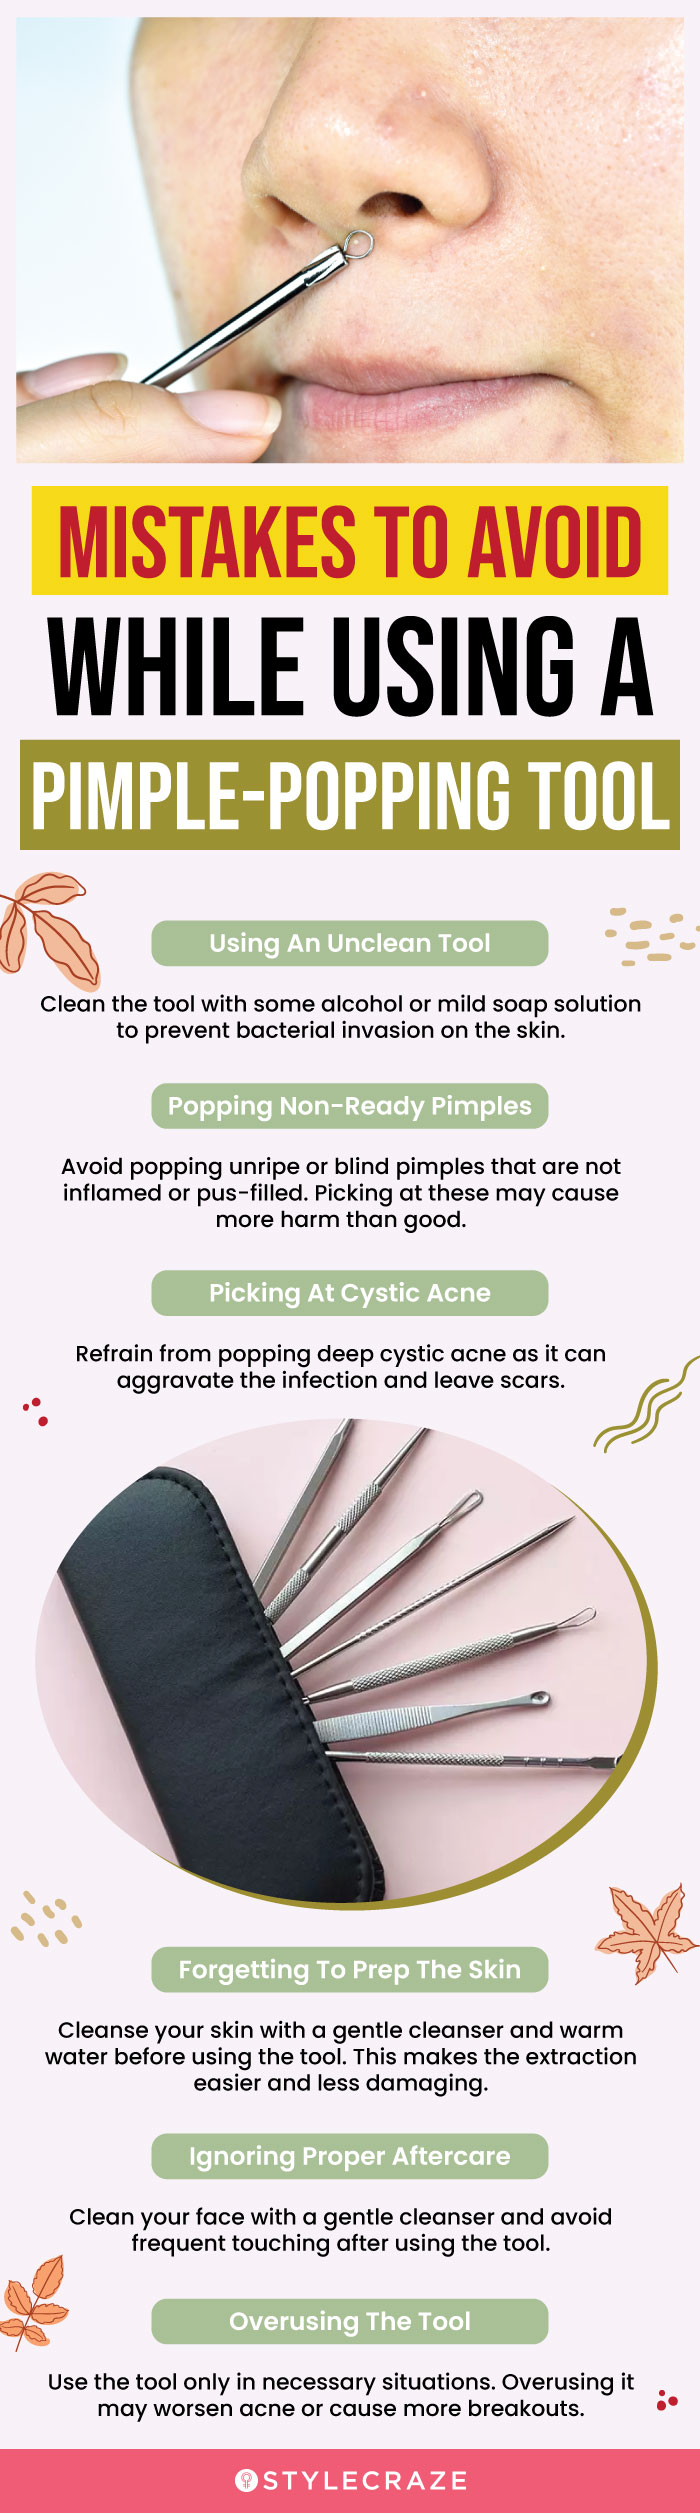 Mistakes To Avoid While Using A Pimple-Popping Tool (infographic)